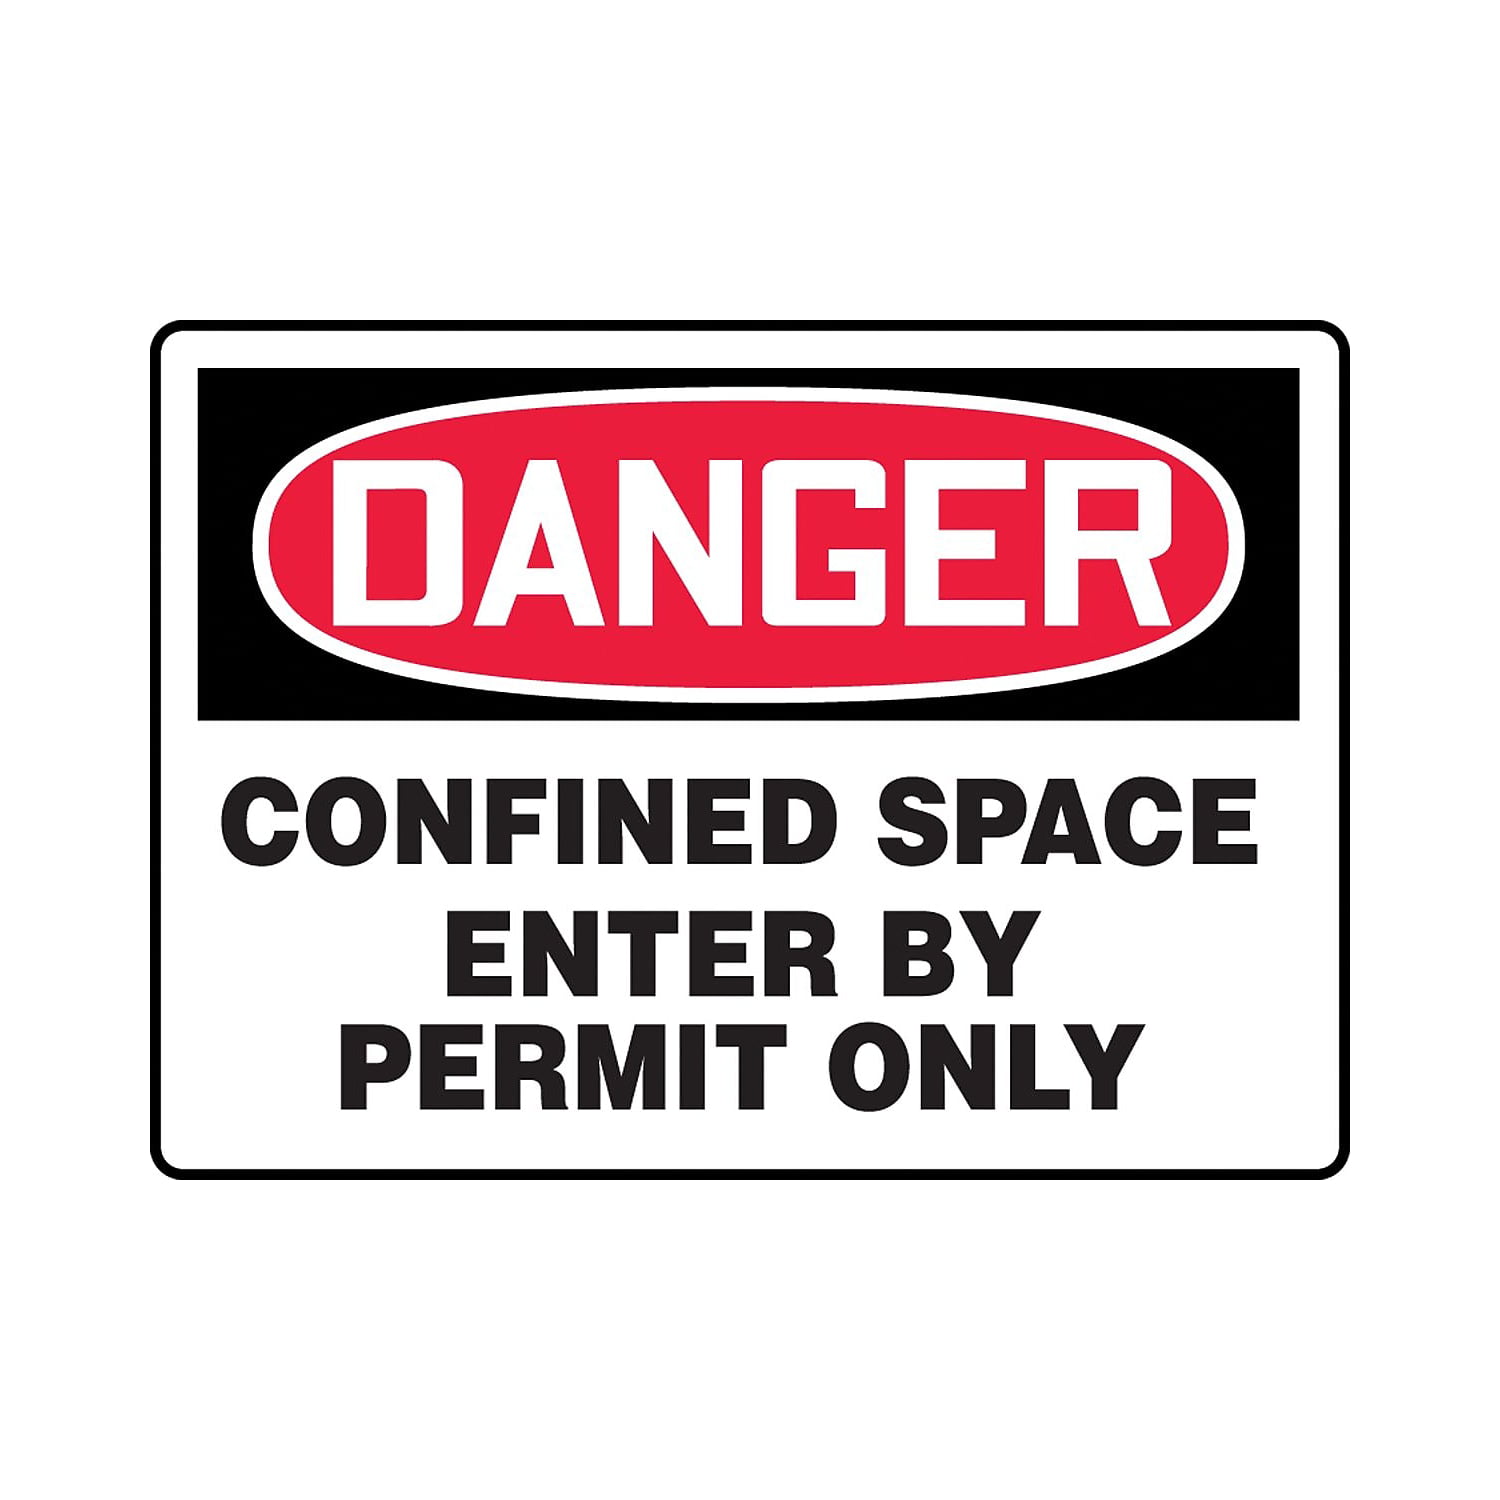 Pack of 5 LegendDanger Permit Required CONFINED Space DO NOT Enter Accuform LCSP264VSP Adhesive Vinyl Safety Label 3.5 Length x 5 Width x 0.004 Thickness Red/Black on White 